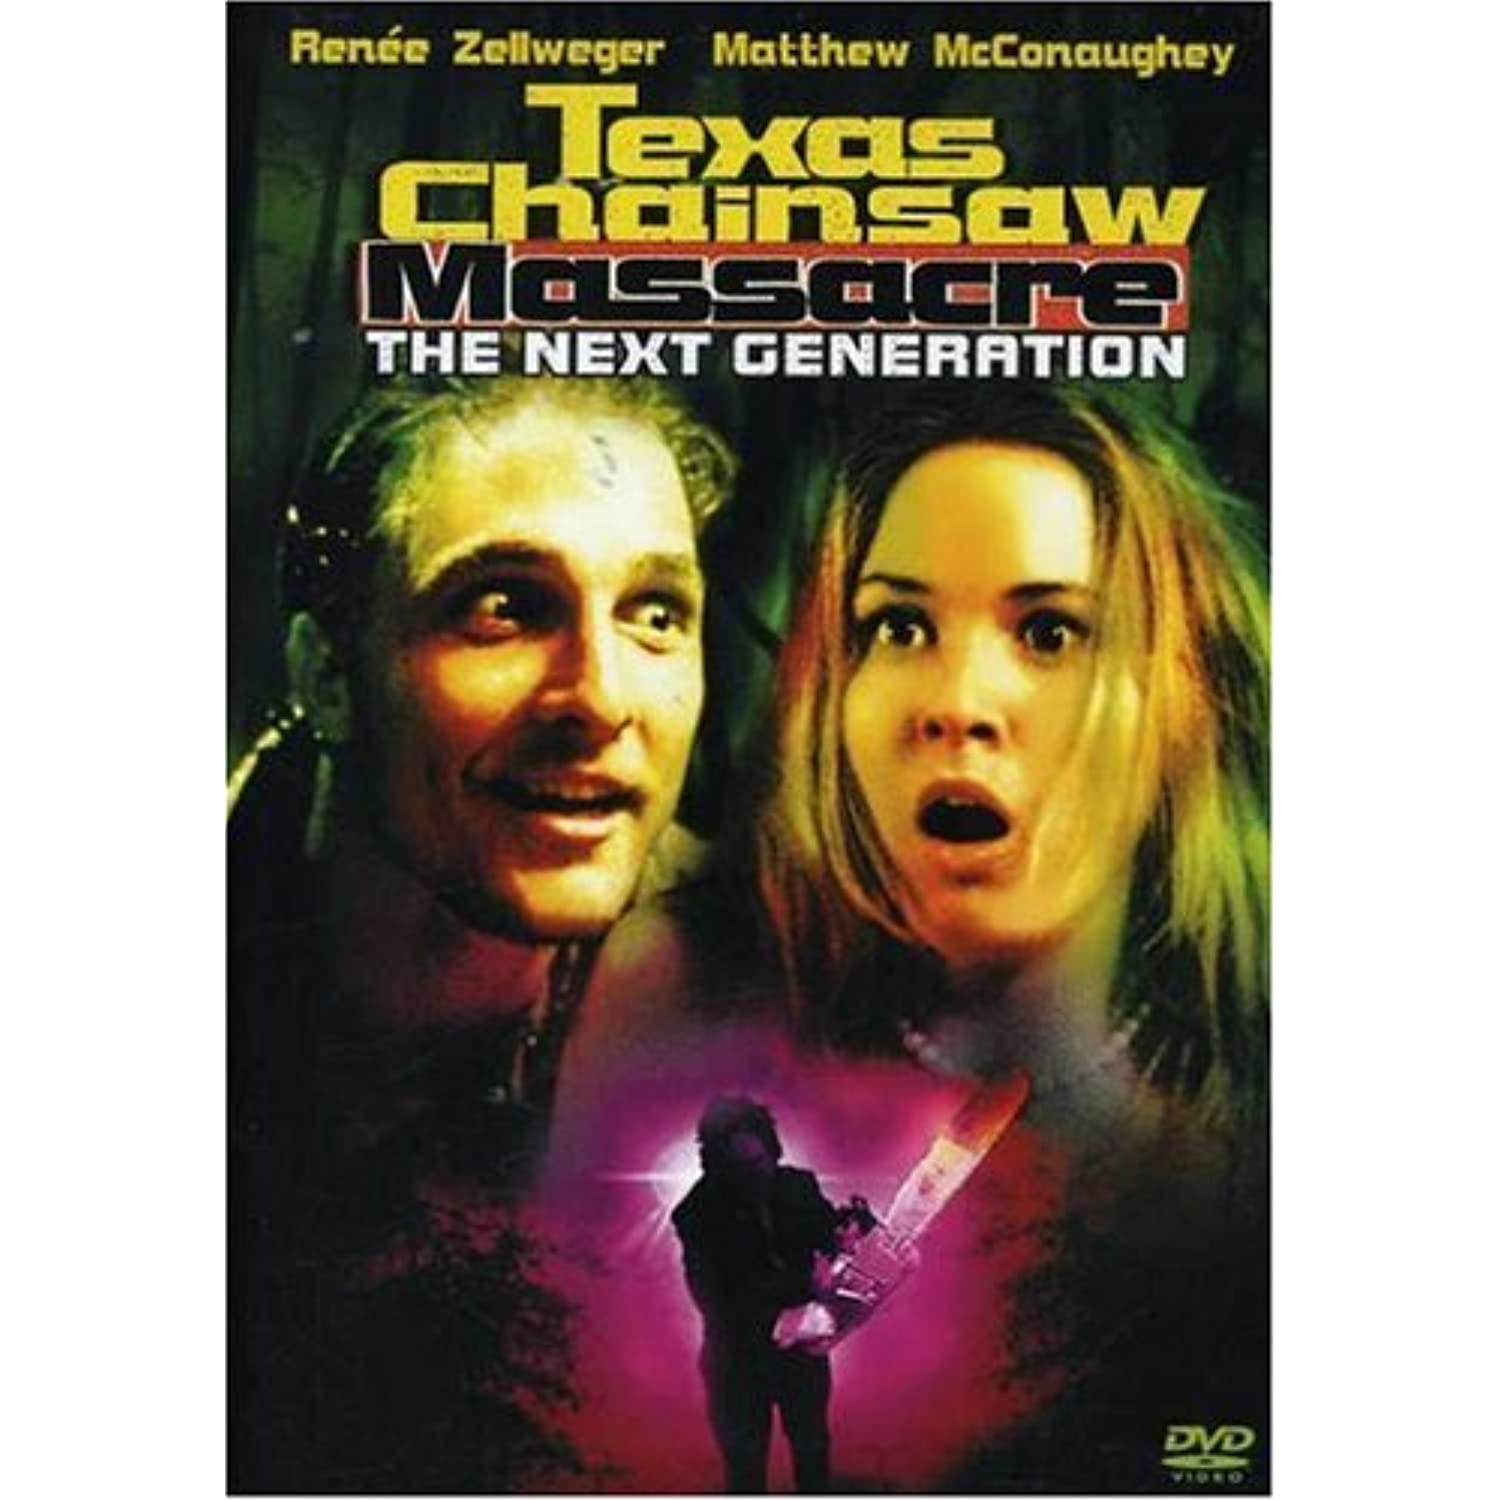 Texas Chainsaw Massacre: The Next Generation DVD - image 1 of 2